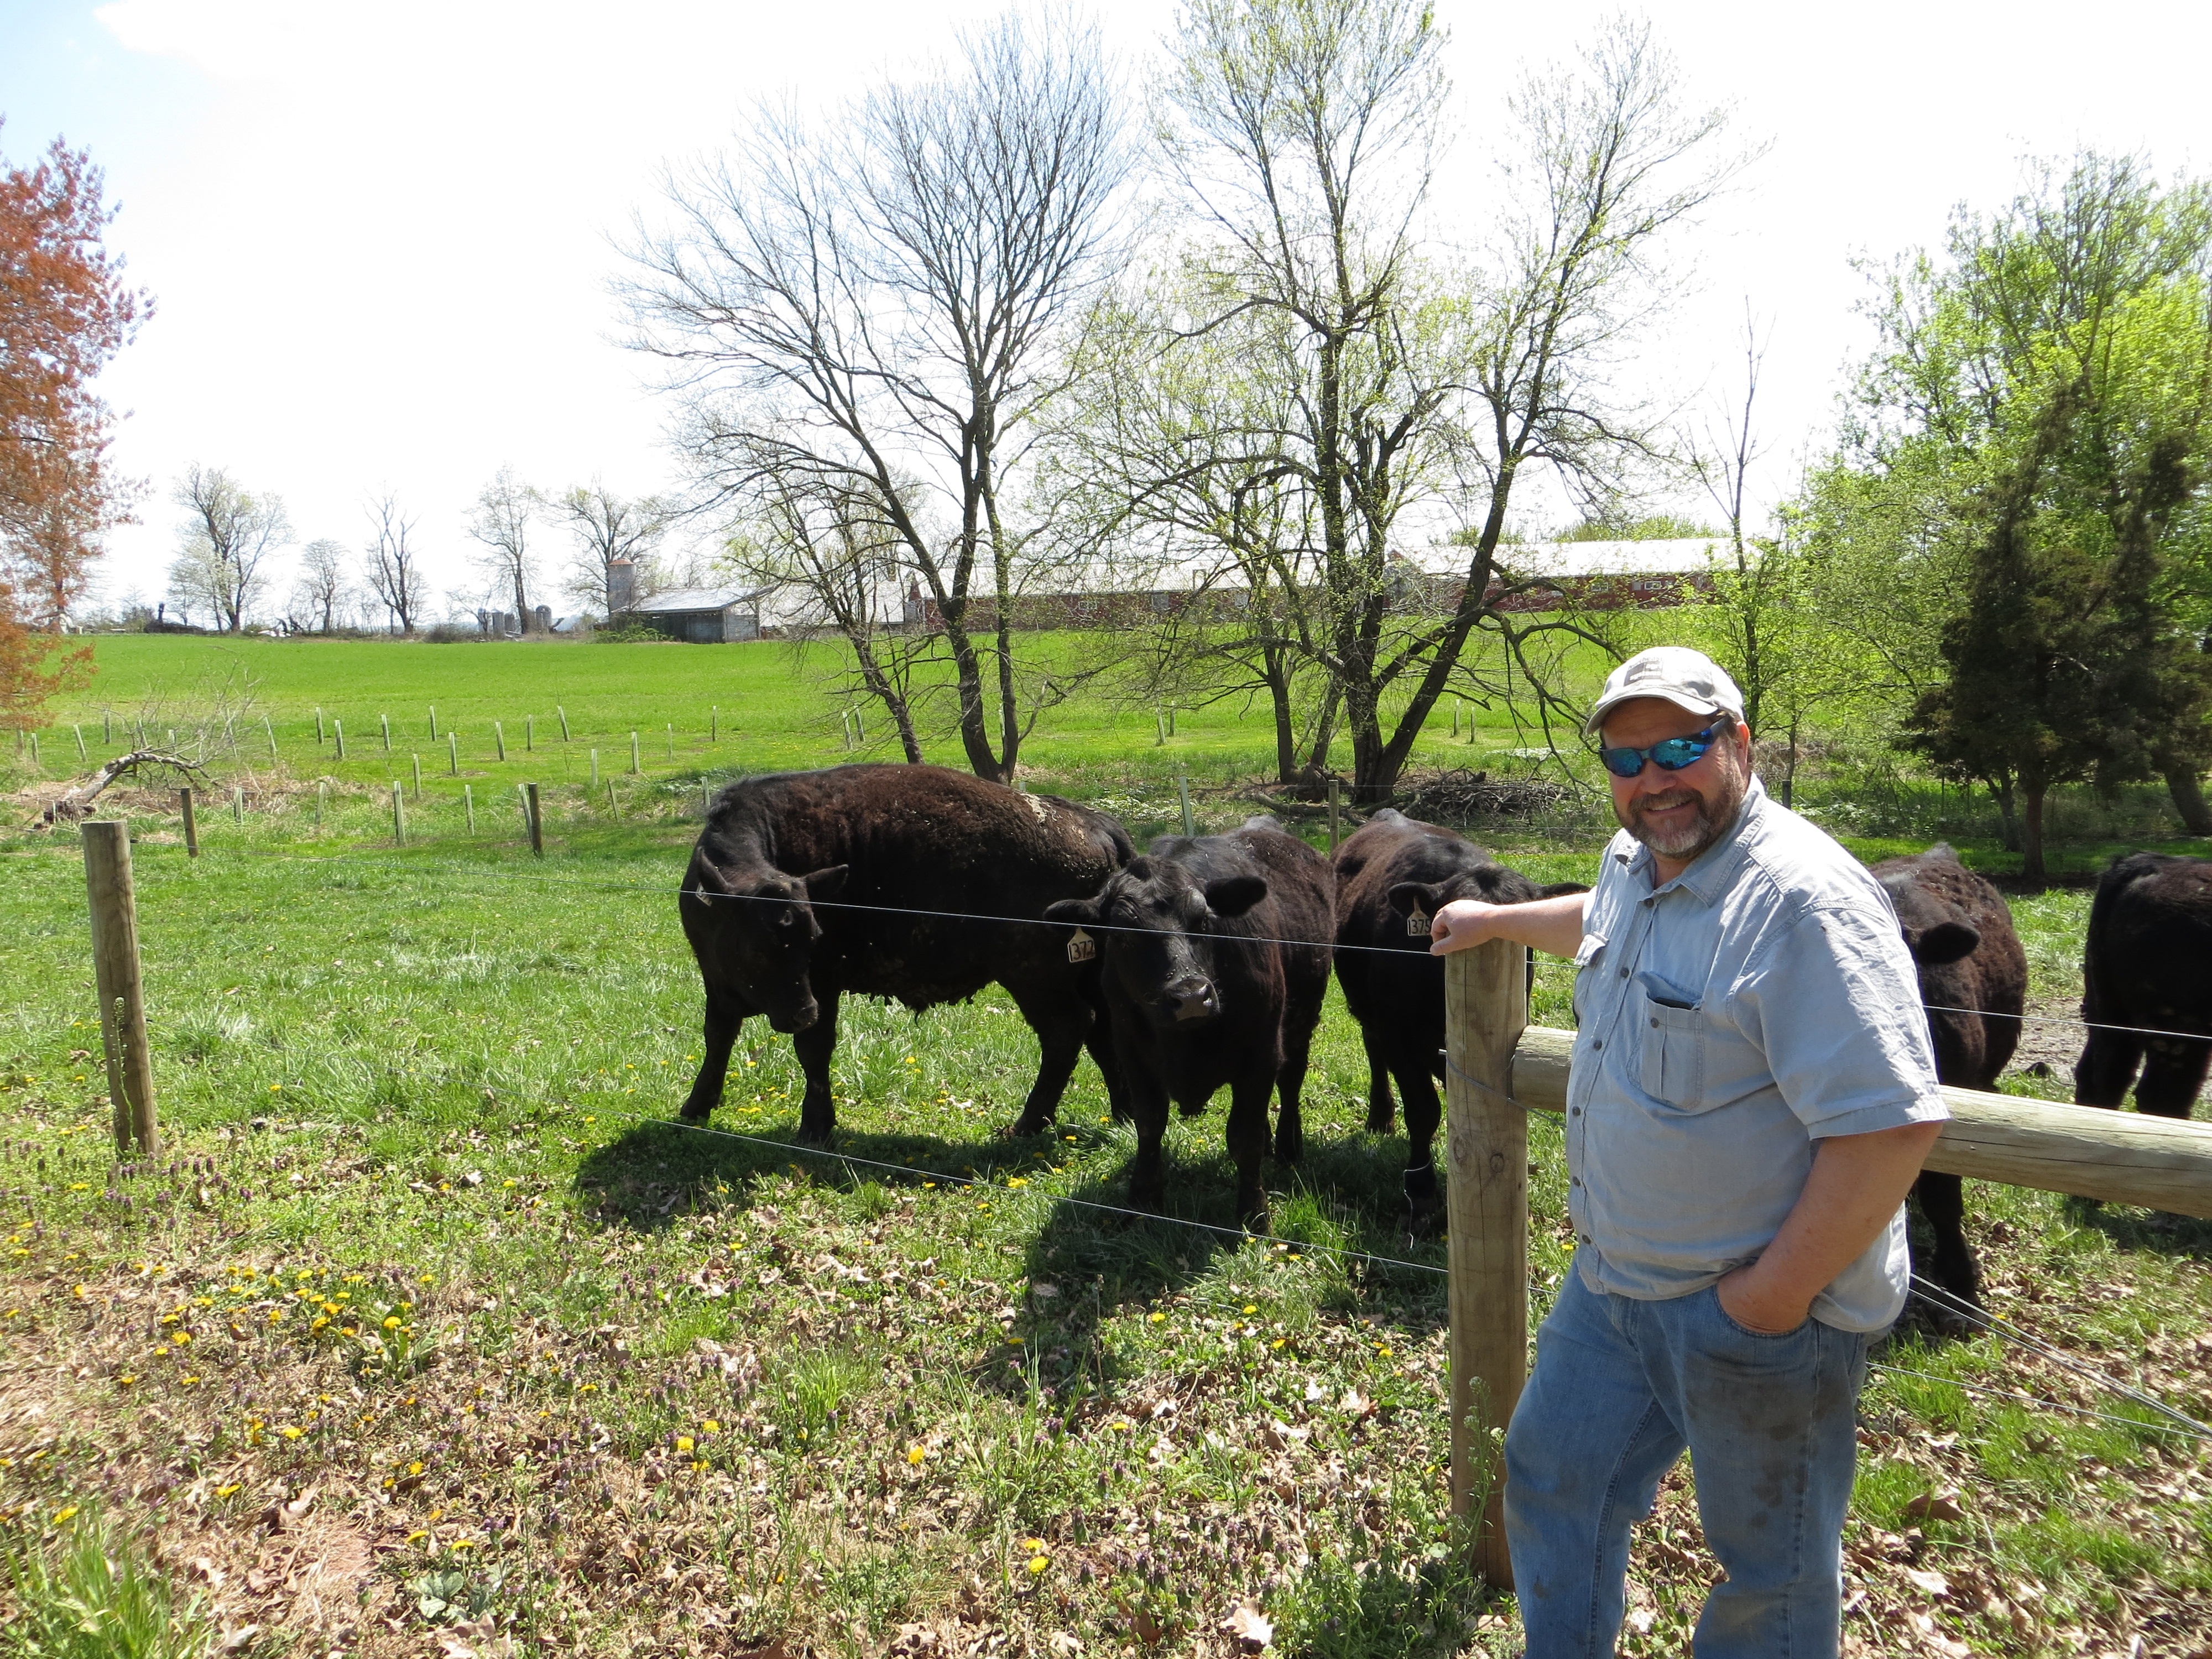 A farmer smiles in front of his cattle.